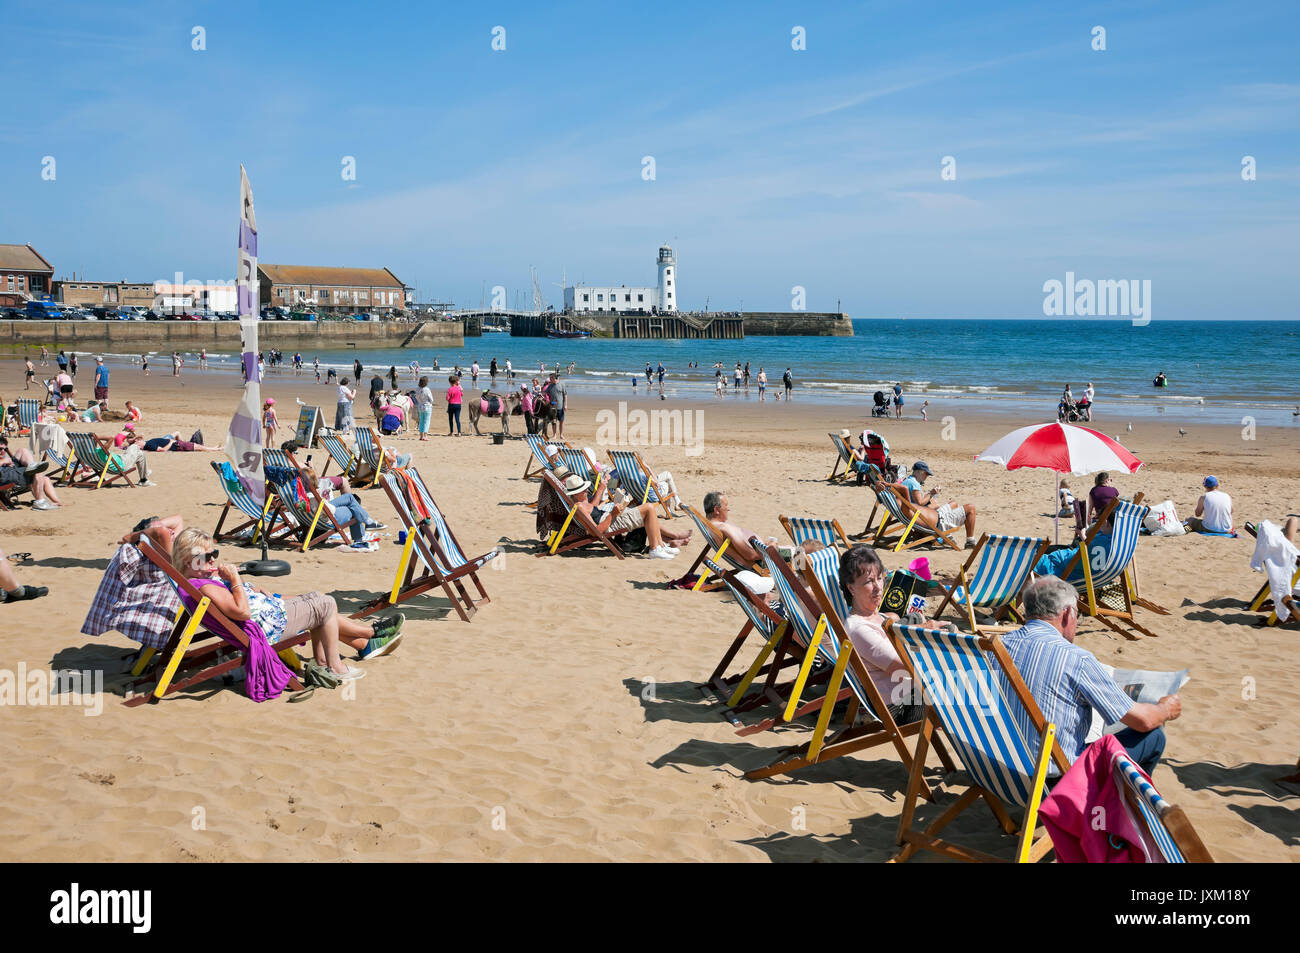 People visitors tourists on deckchairs South Bay beach in summer Scarborough seafront North Yorkshire England UK United Kingdom GB Great Britain Stock Photo